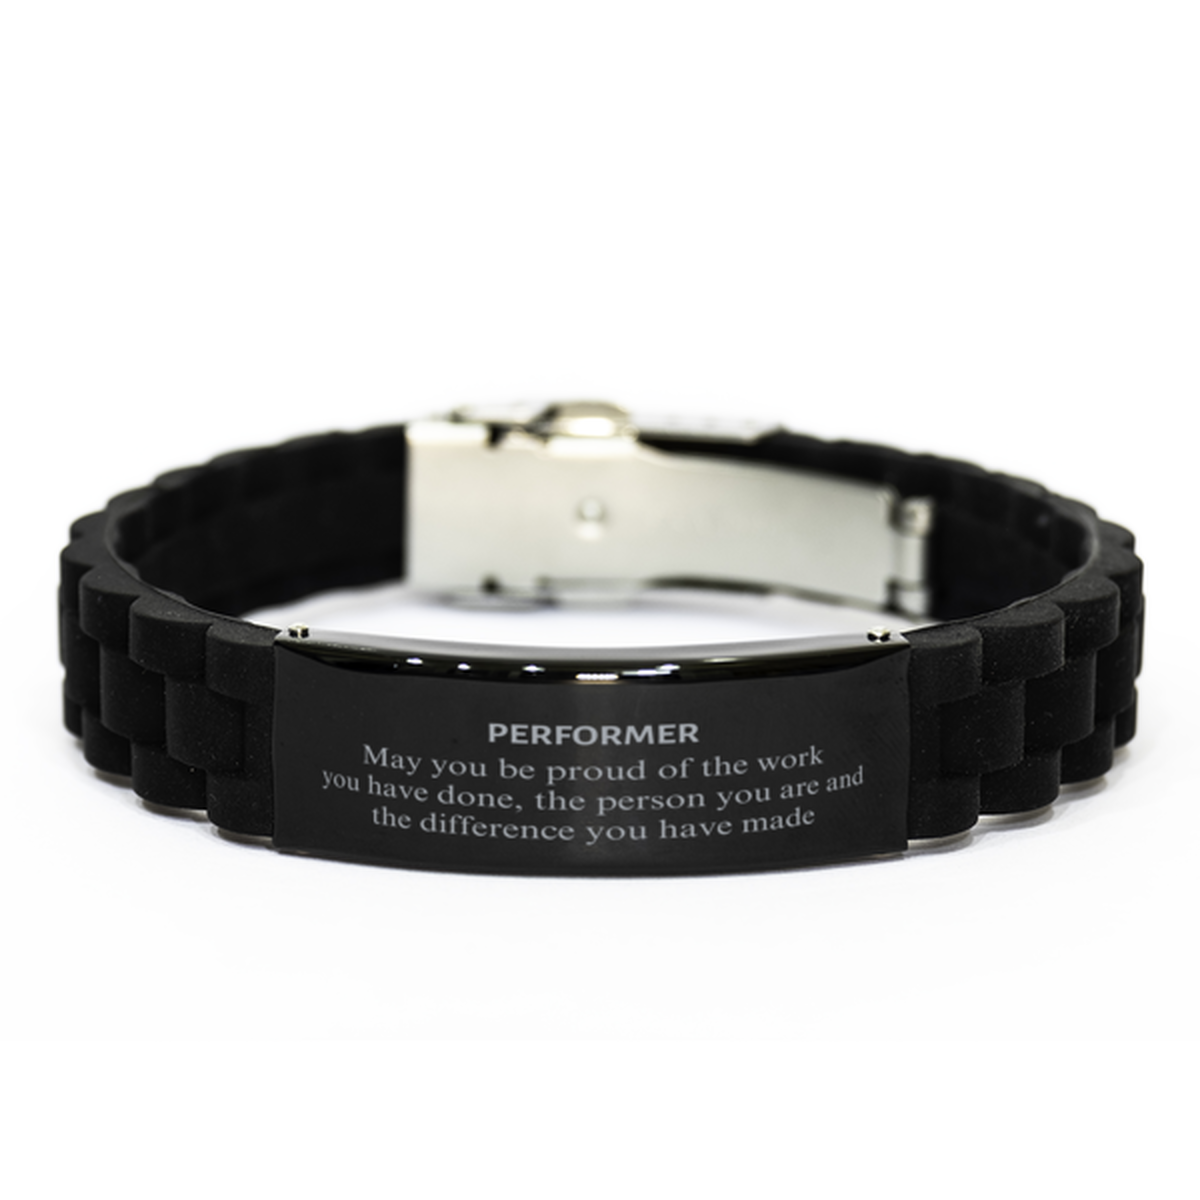 Performer May you be proud of the work you have done, Retirement Performer Black Glidelock Clasp Bracelet for Colleague Appreciation Gifts Amazing for Performer